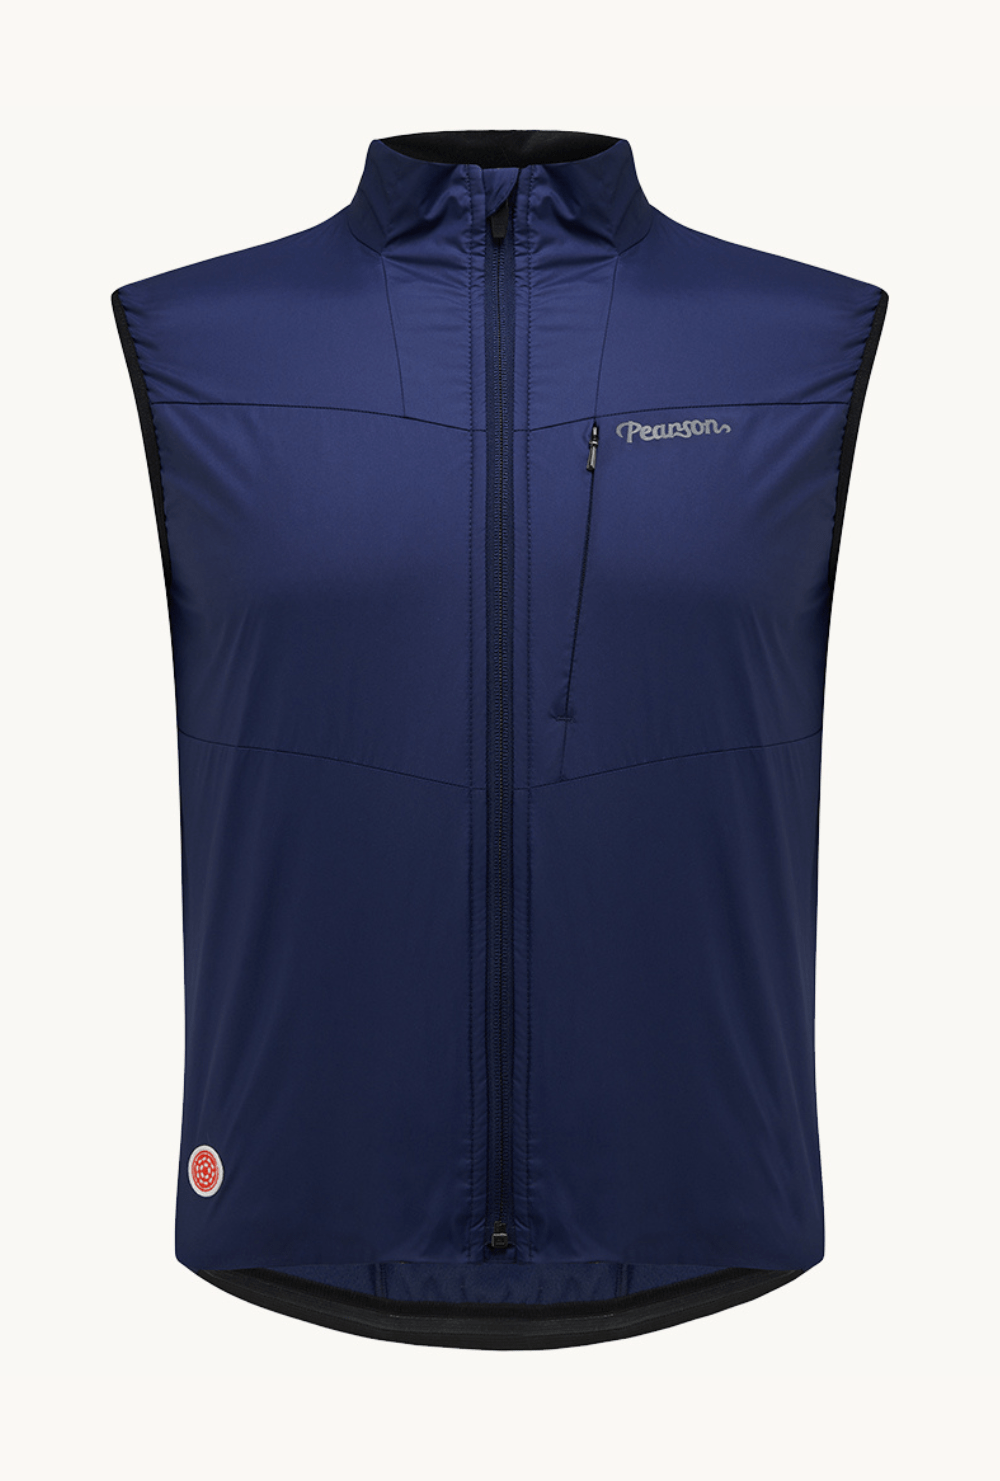 Pearson 1860  Feel The Benefits - Road Insulated Gilet Blue Ink  Large / Blue Ink